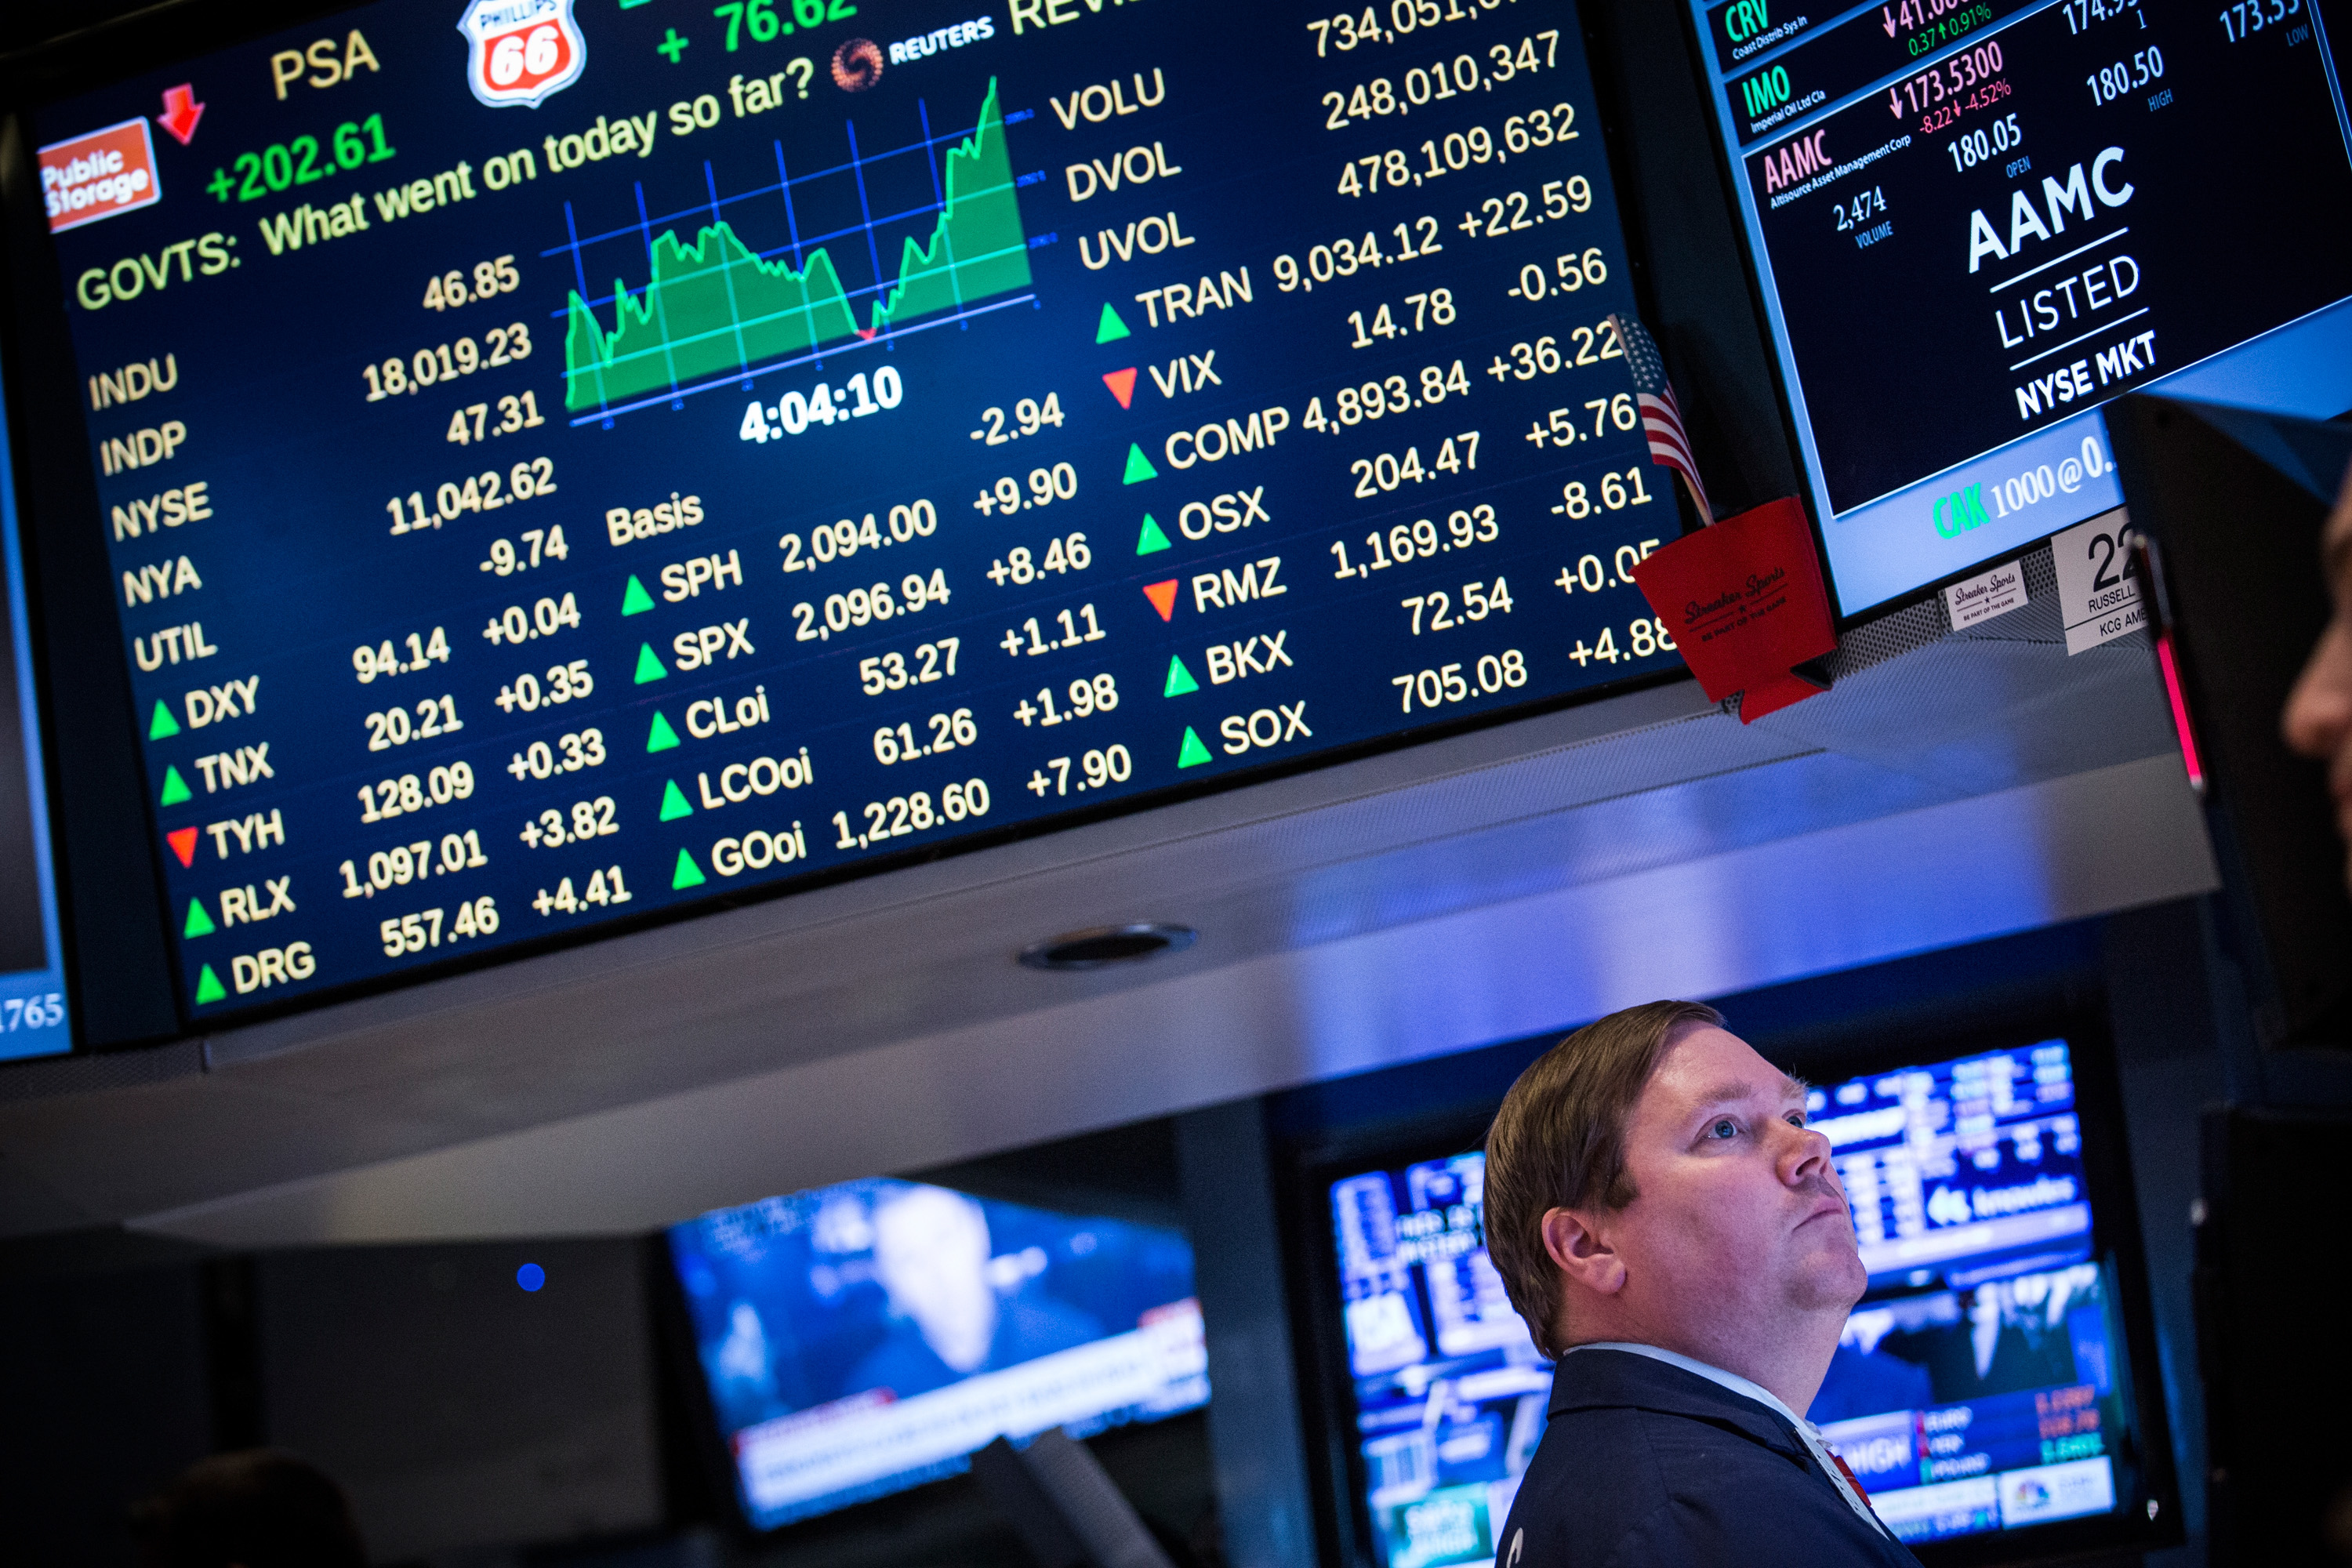 A trader works on the floor of the New York Stock Exchange during the afternoon of Feb. 13, 2015 in New York City. (Andrew Burton—2015 Getty Images)